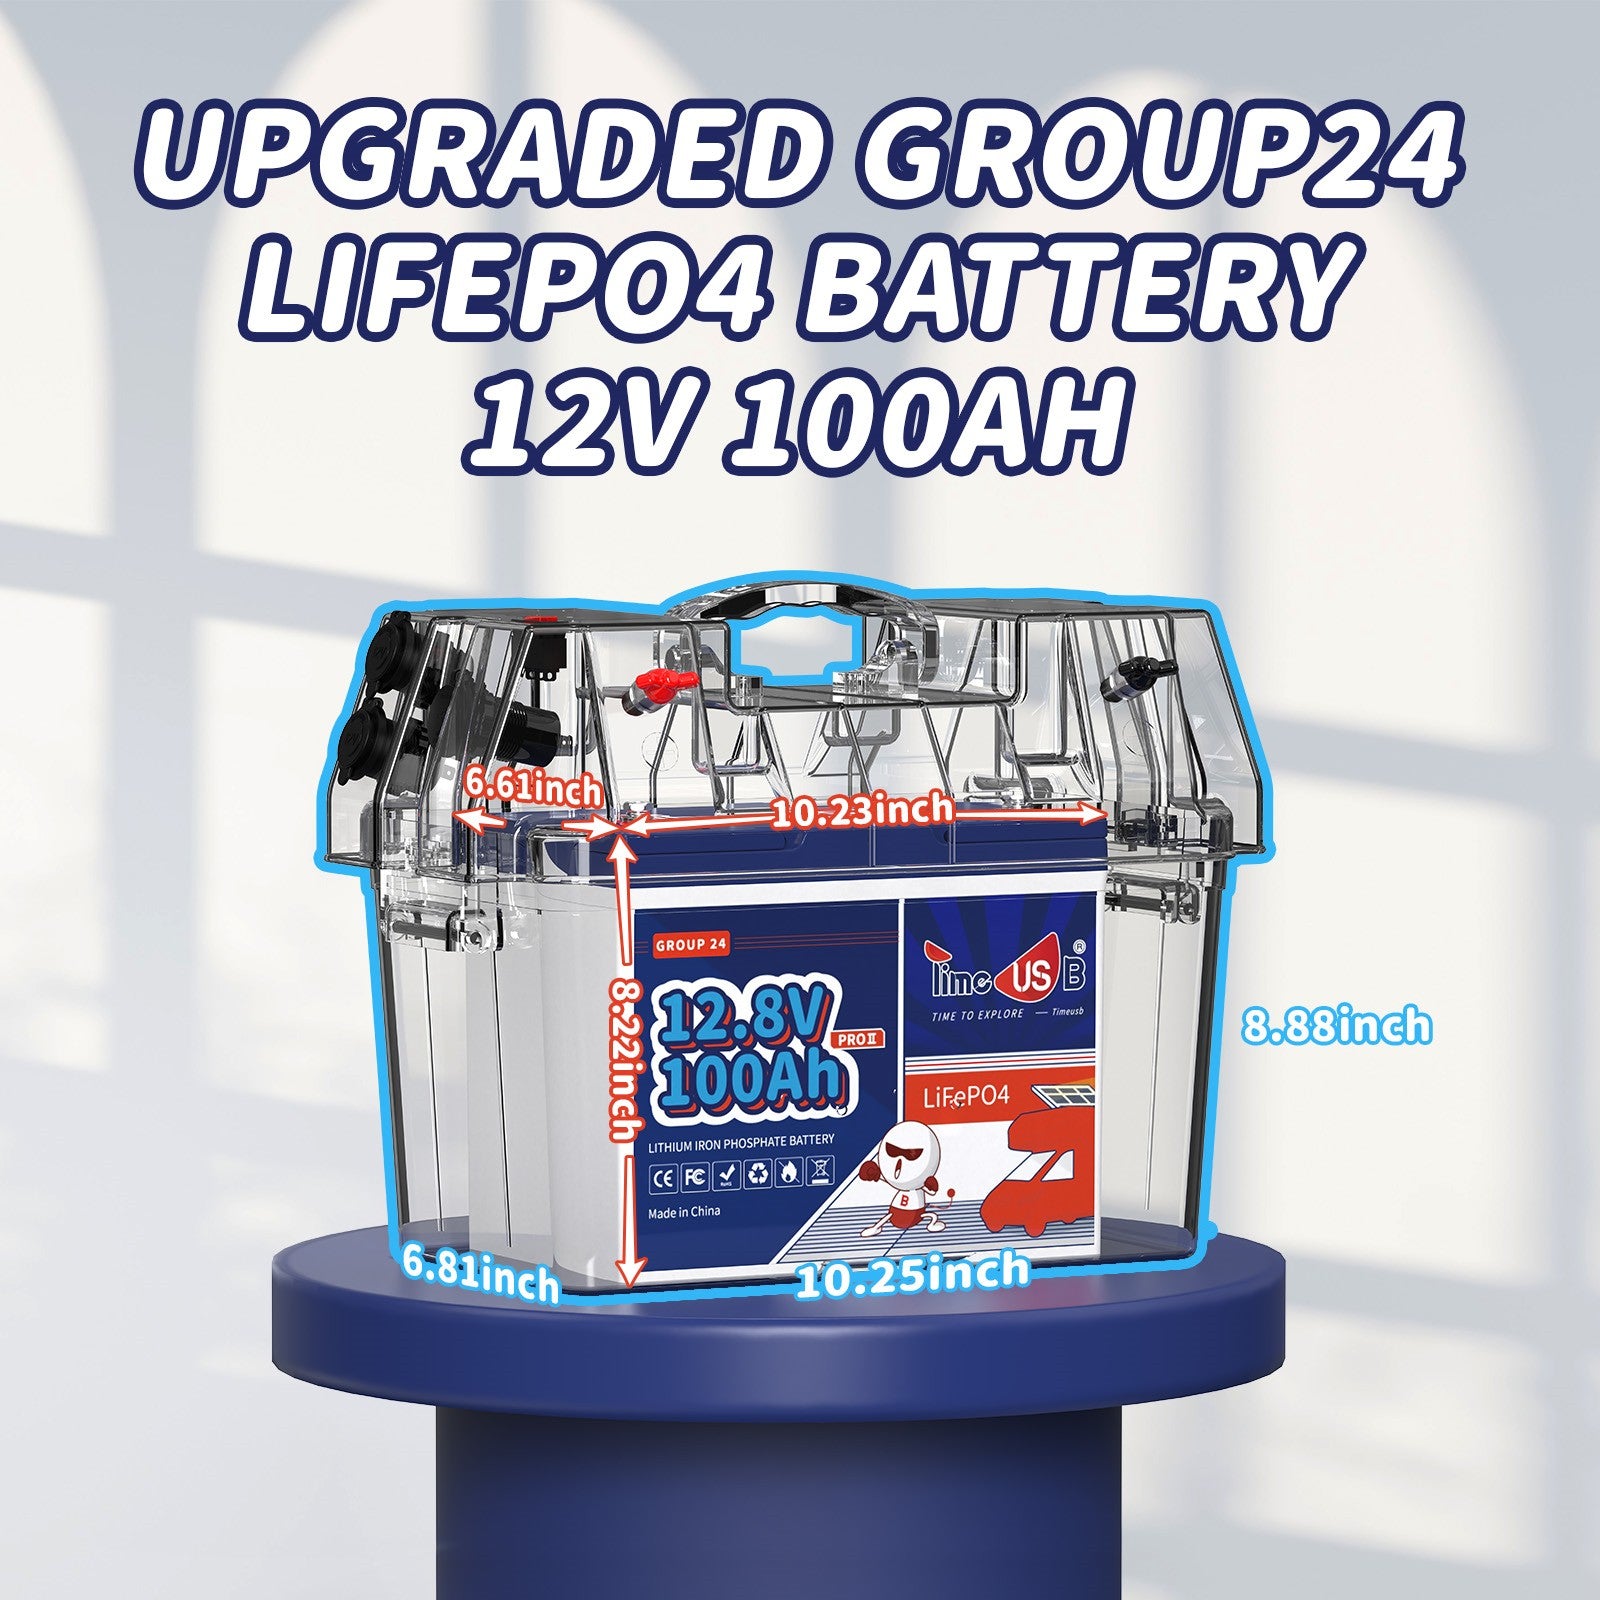 The Size of Timeusb Lithium Group 24 Battery